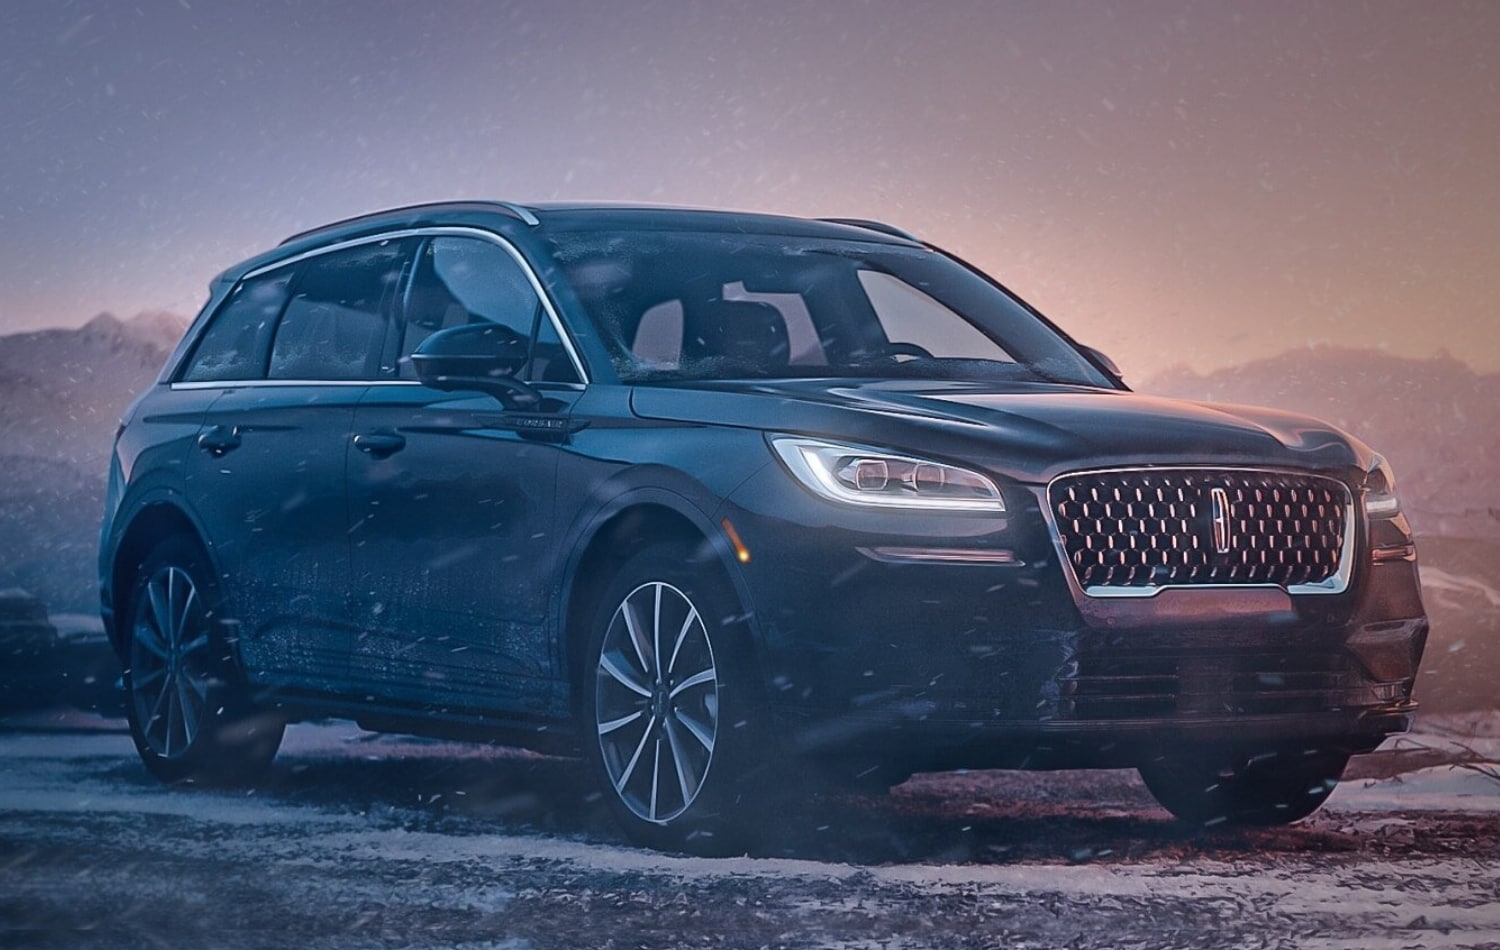 The new 2021 Lincoln Corsair SUV in a snow storm showing that it is built for comfort even in extreme weather conditions